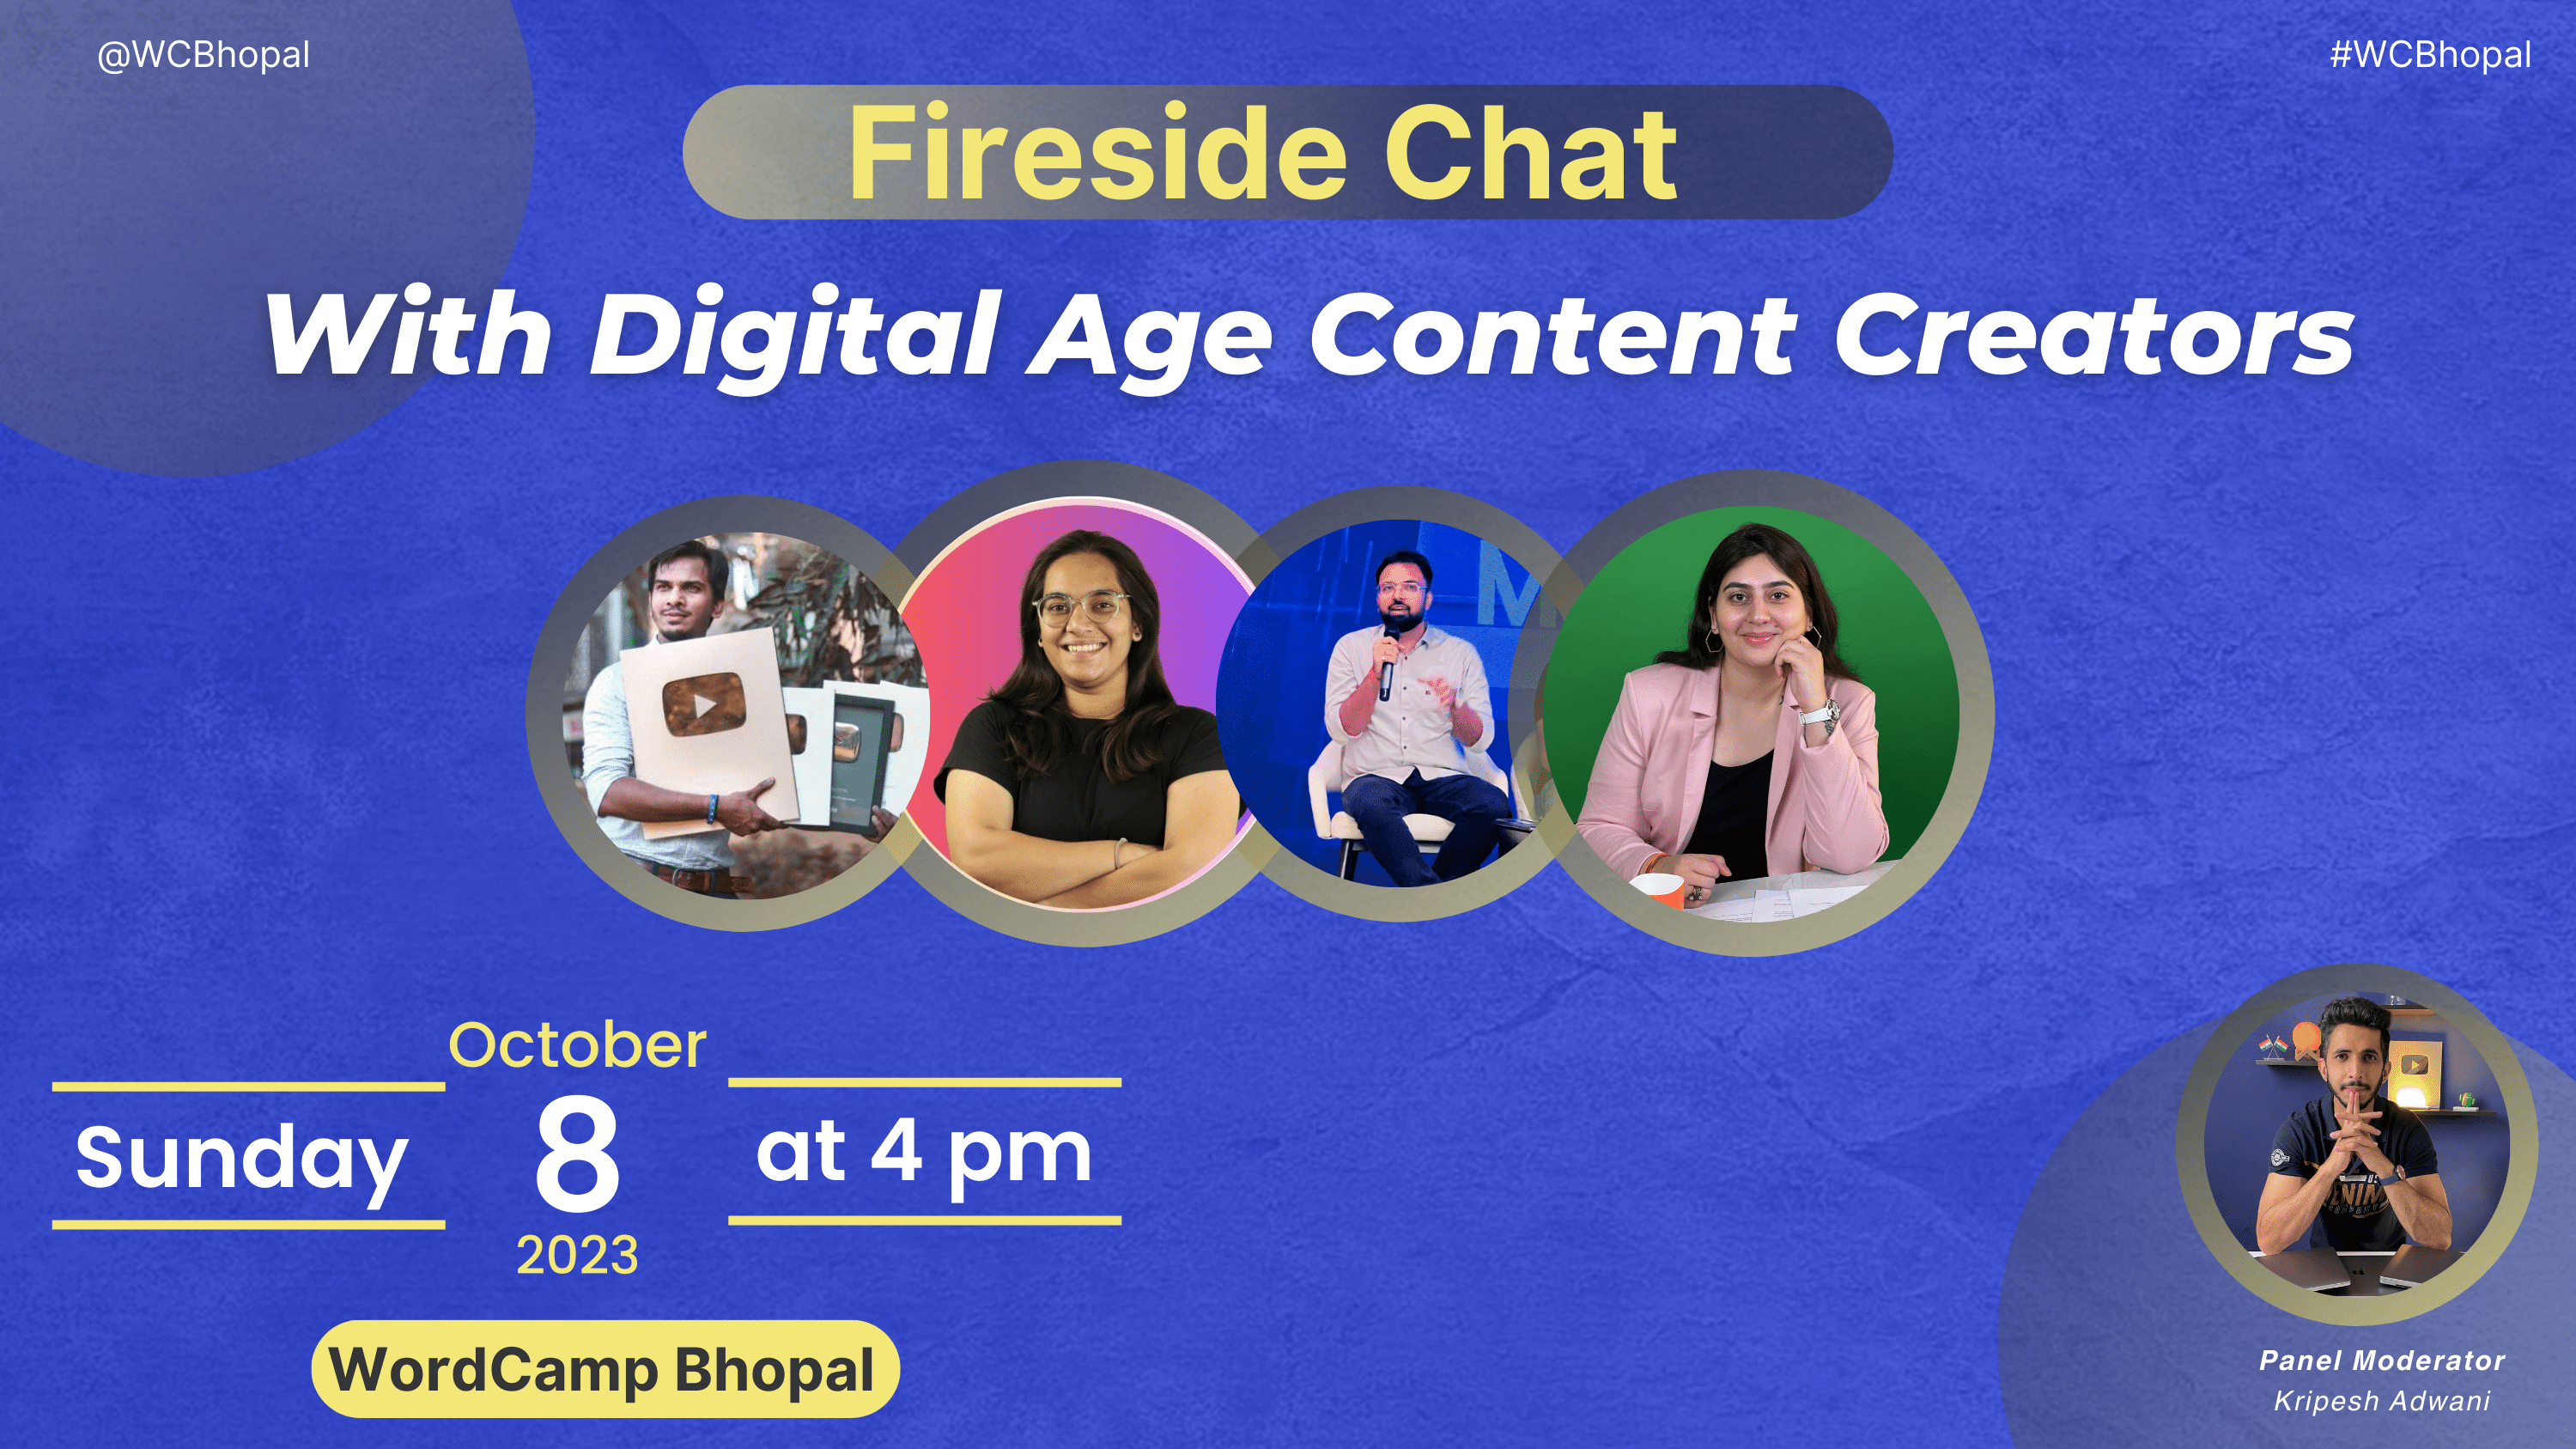 Get Ready for an Exciting Panel Discussion: “Fireside Chat With Digital Age Content Creators”